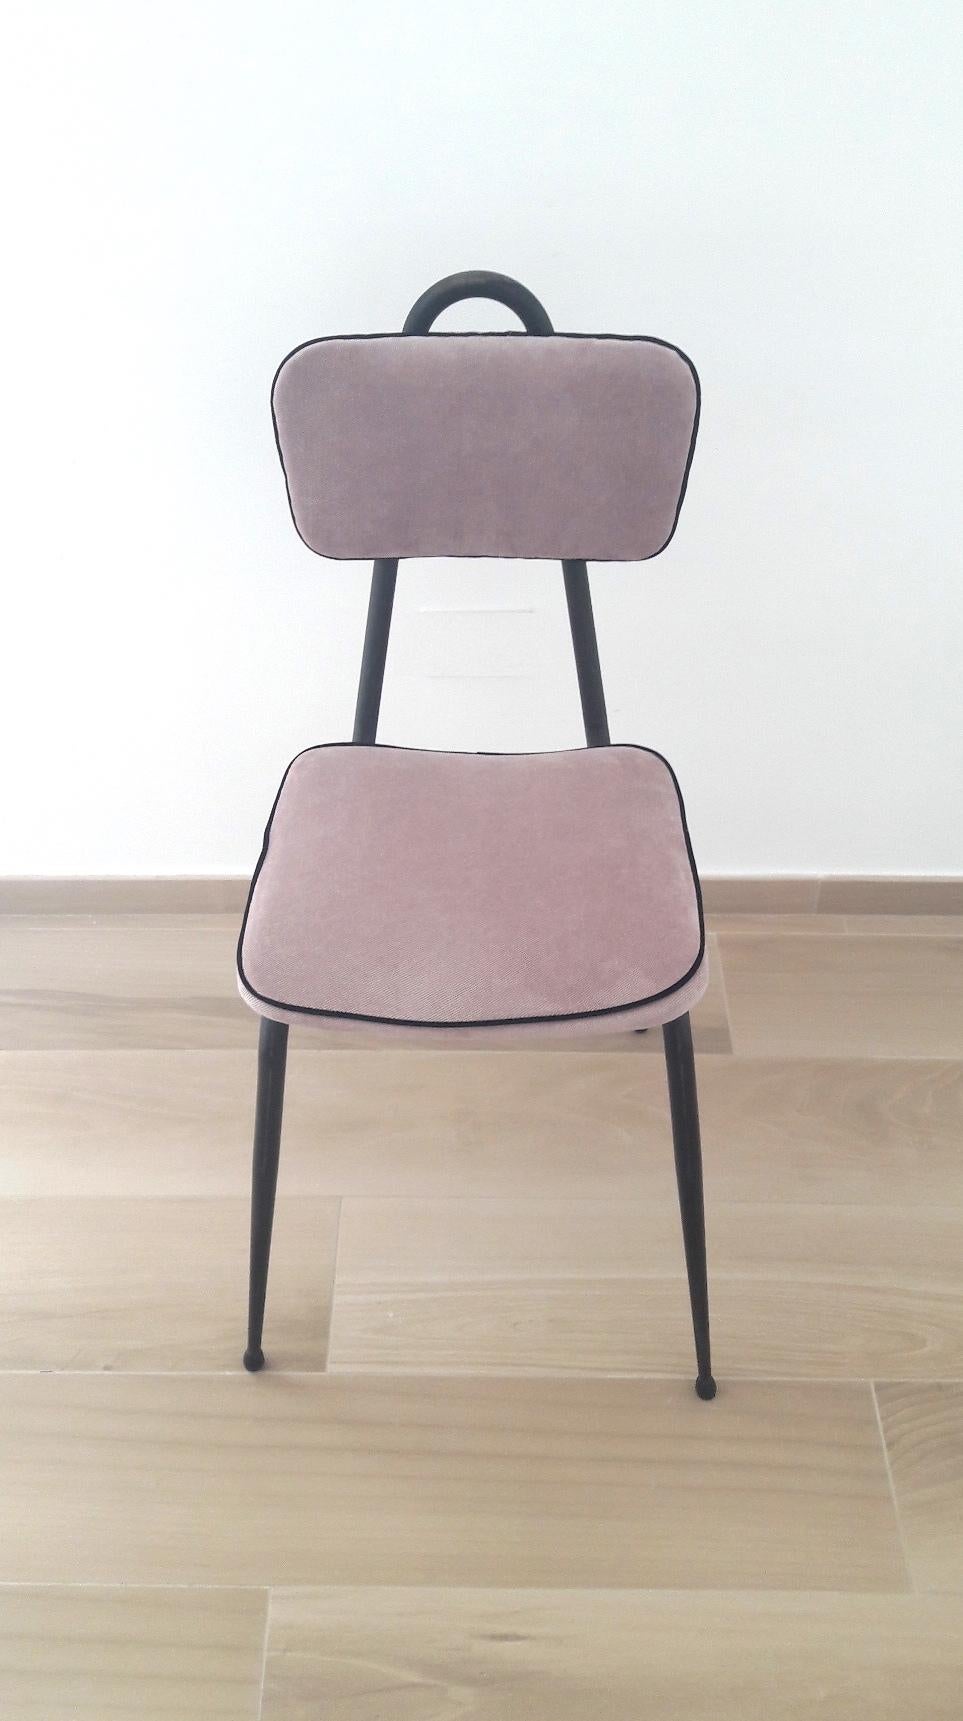 Lacquered Mid-Century Modern Pair of Dark Metal and Lilac Velvet Chairs, 1950s For Sale